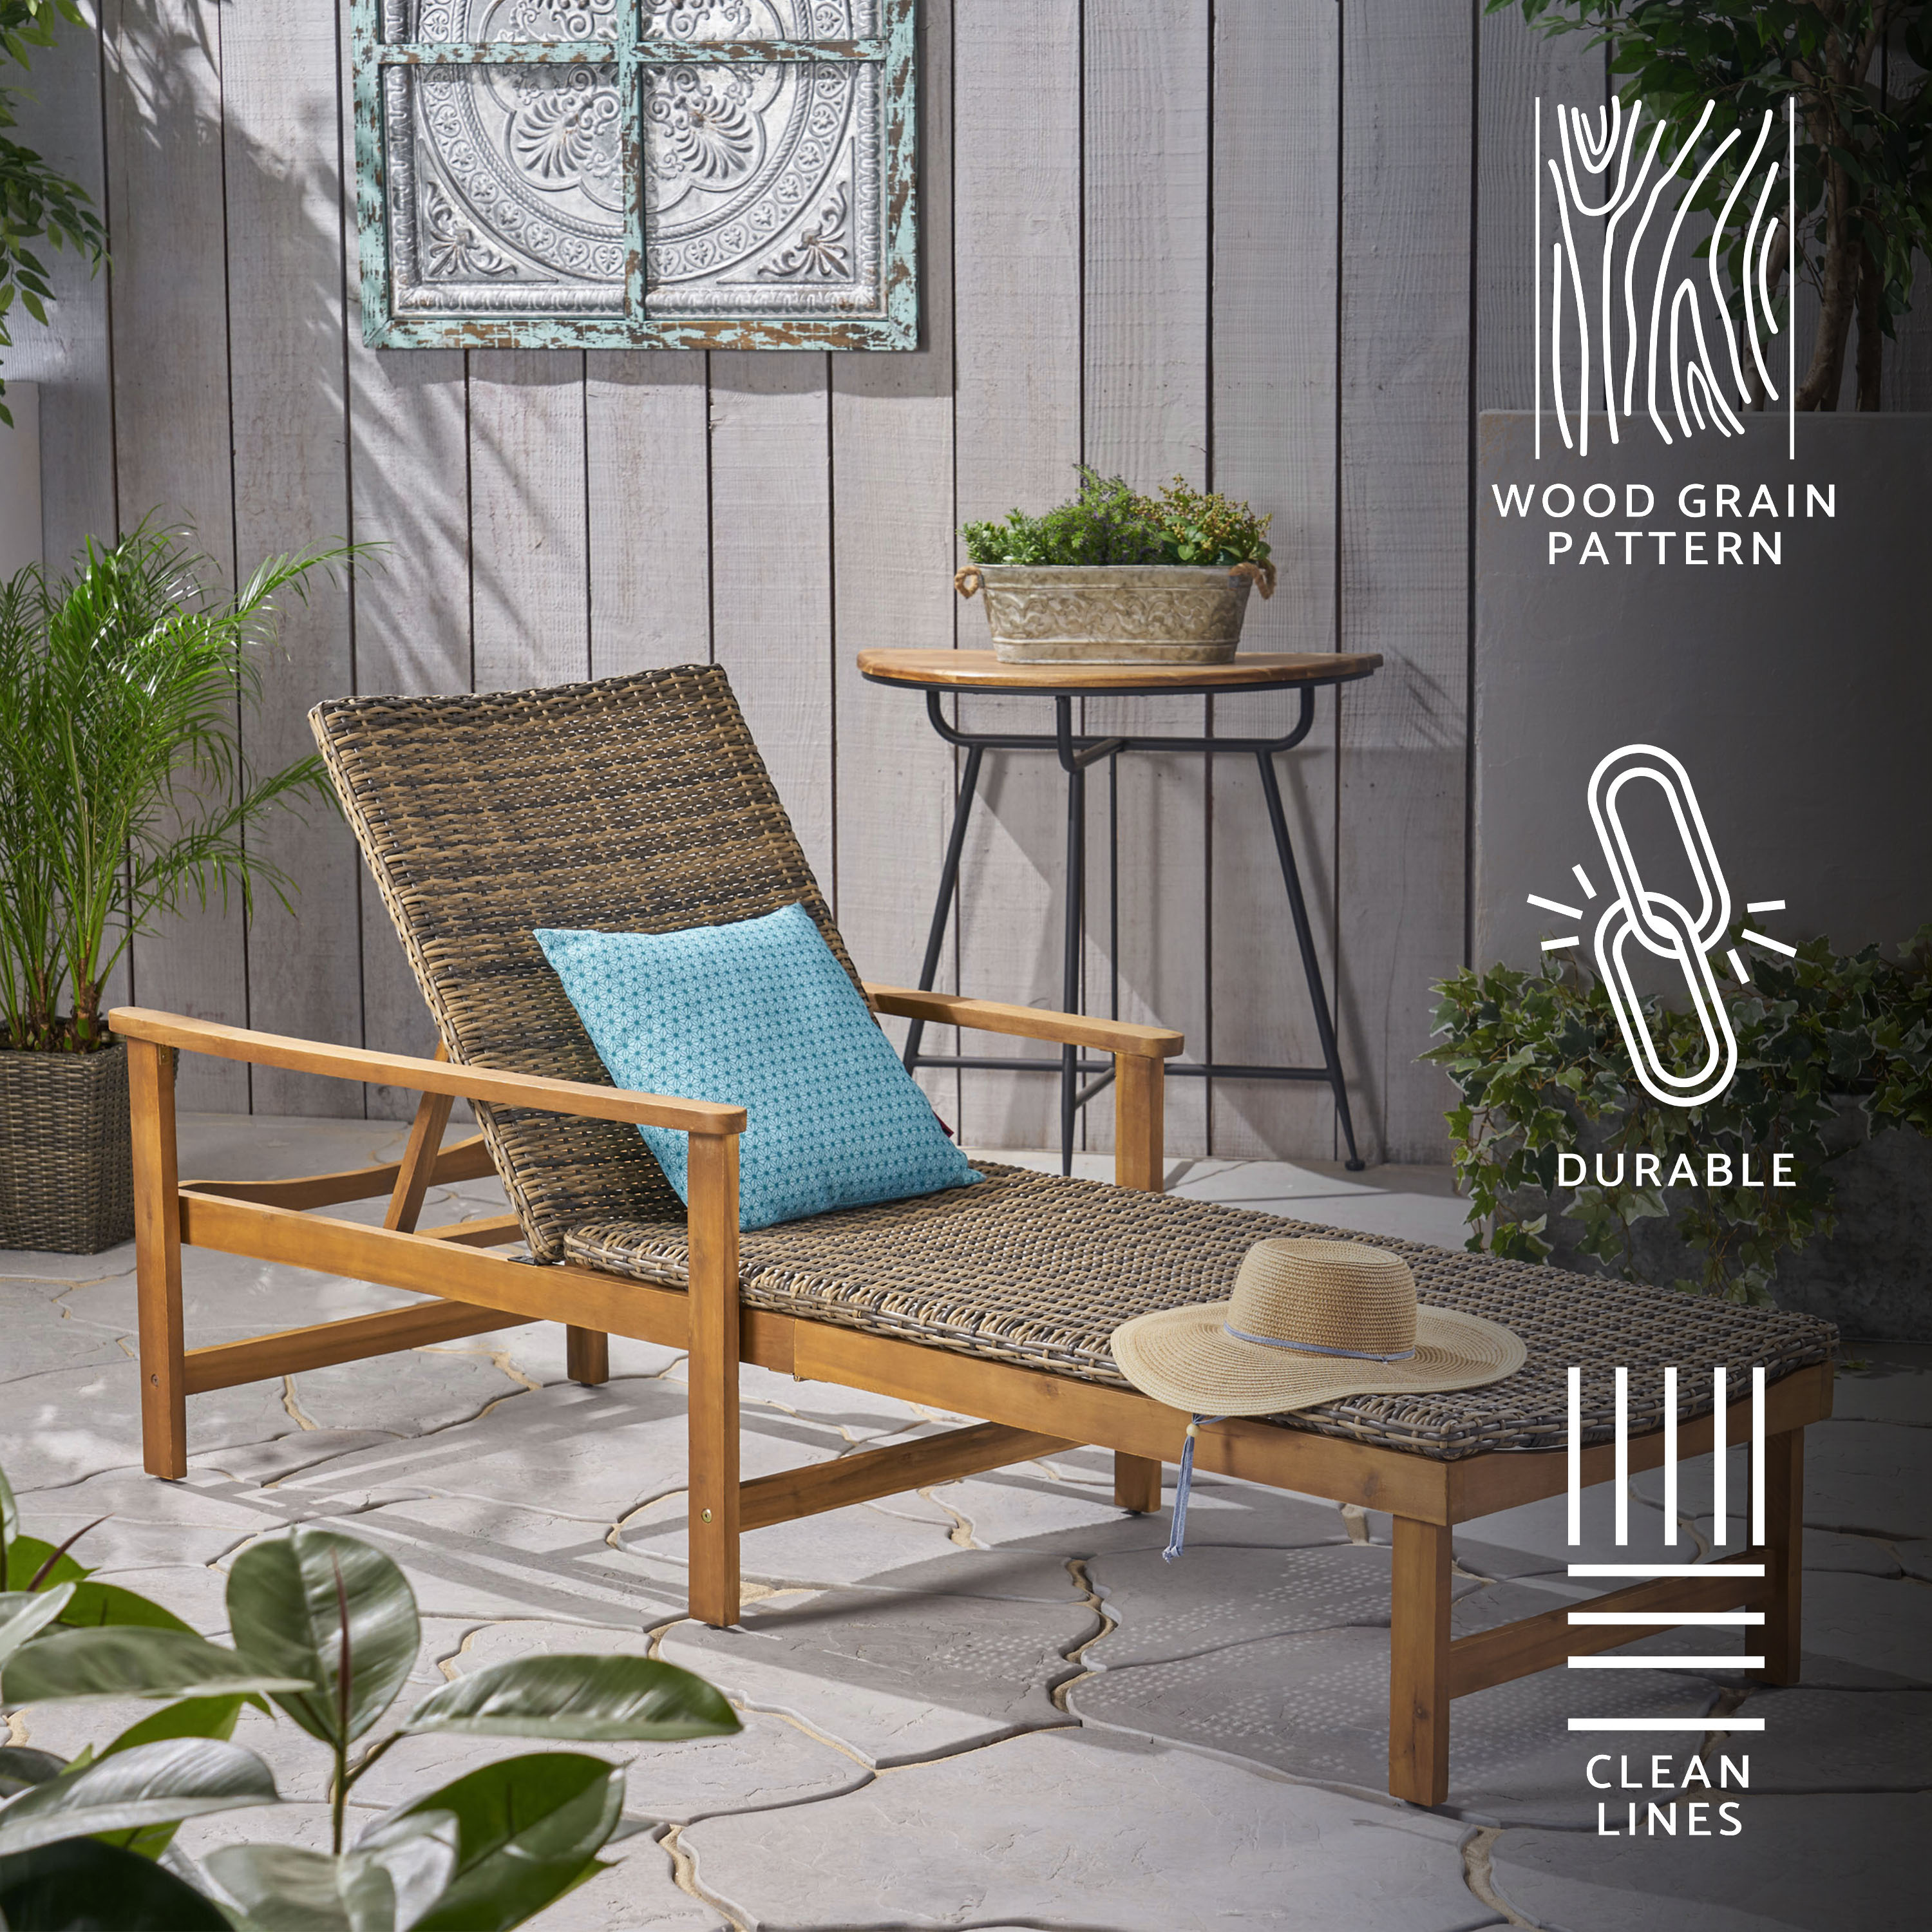 Kyle Outdoor Rustic Acacia Wood Chaise Lounge with Wicker Seating, Natural and Gray - image 1 of 8